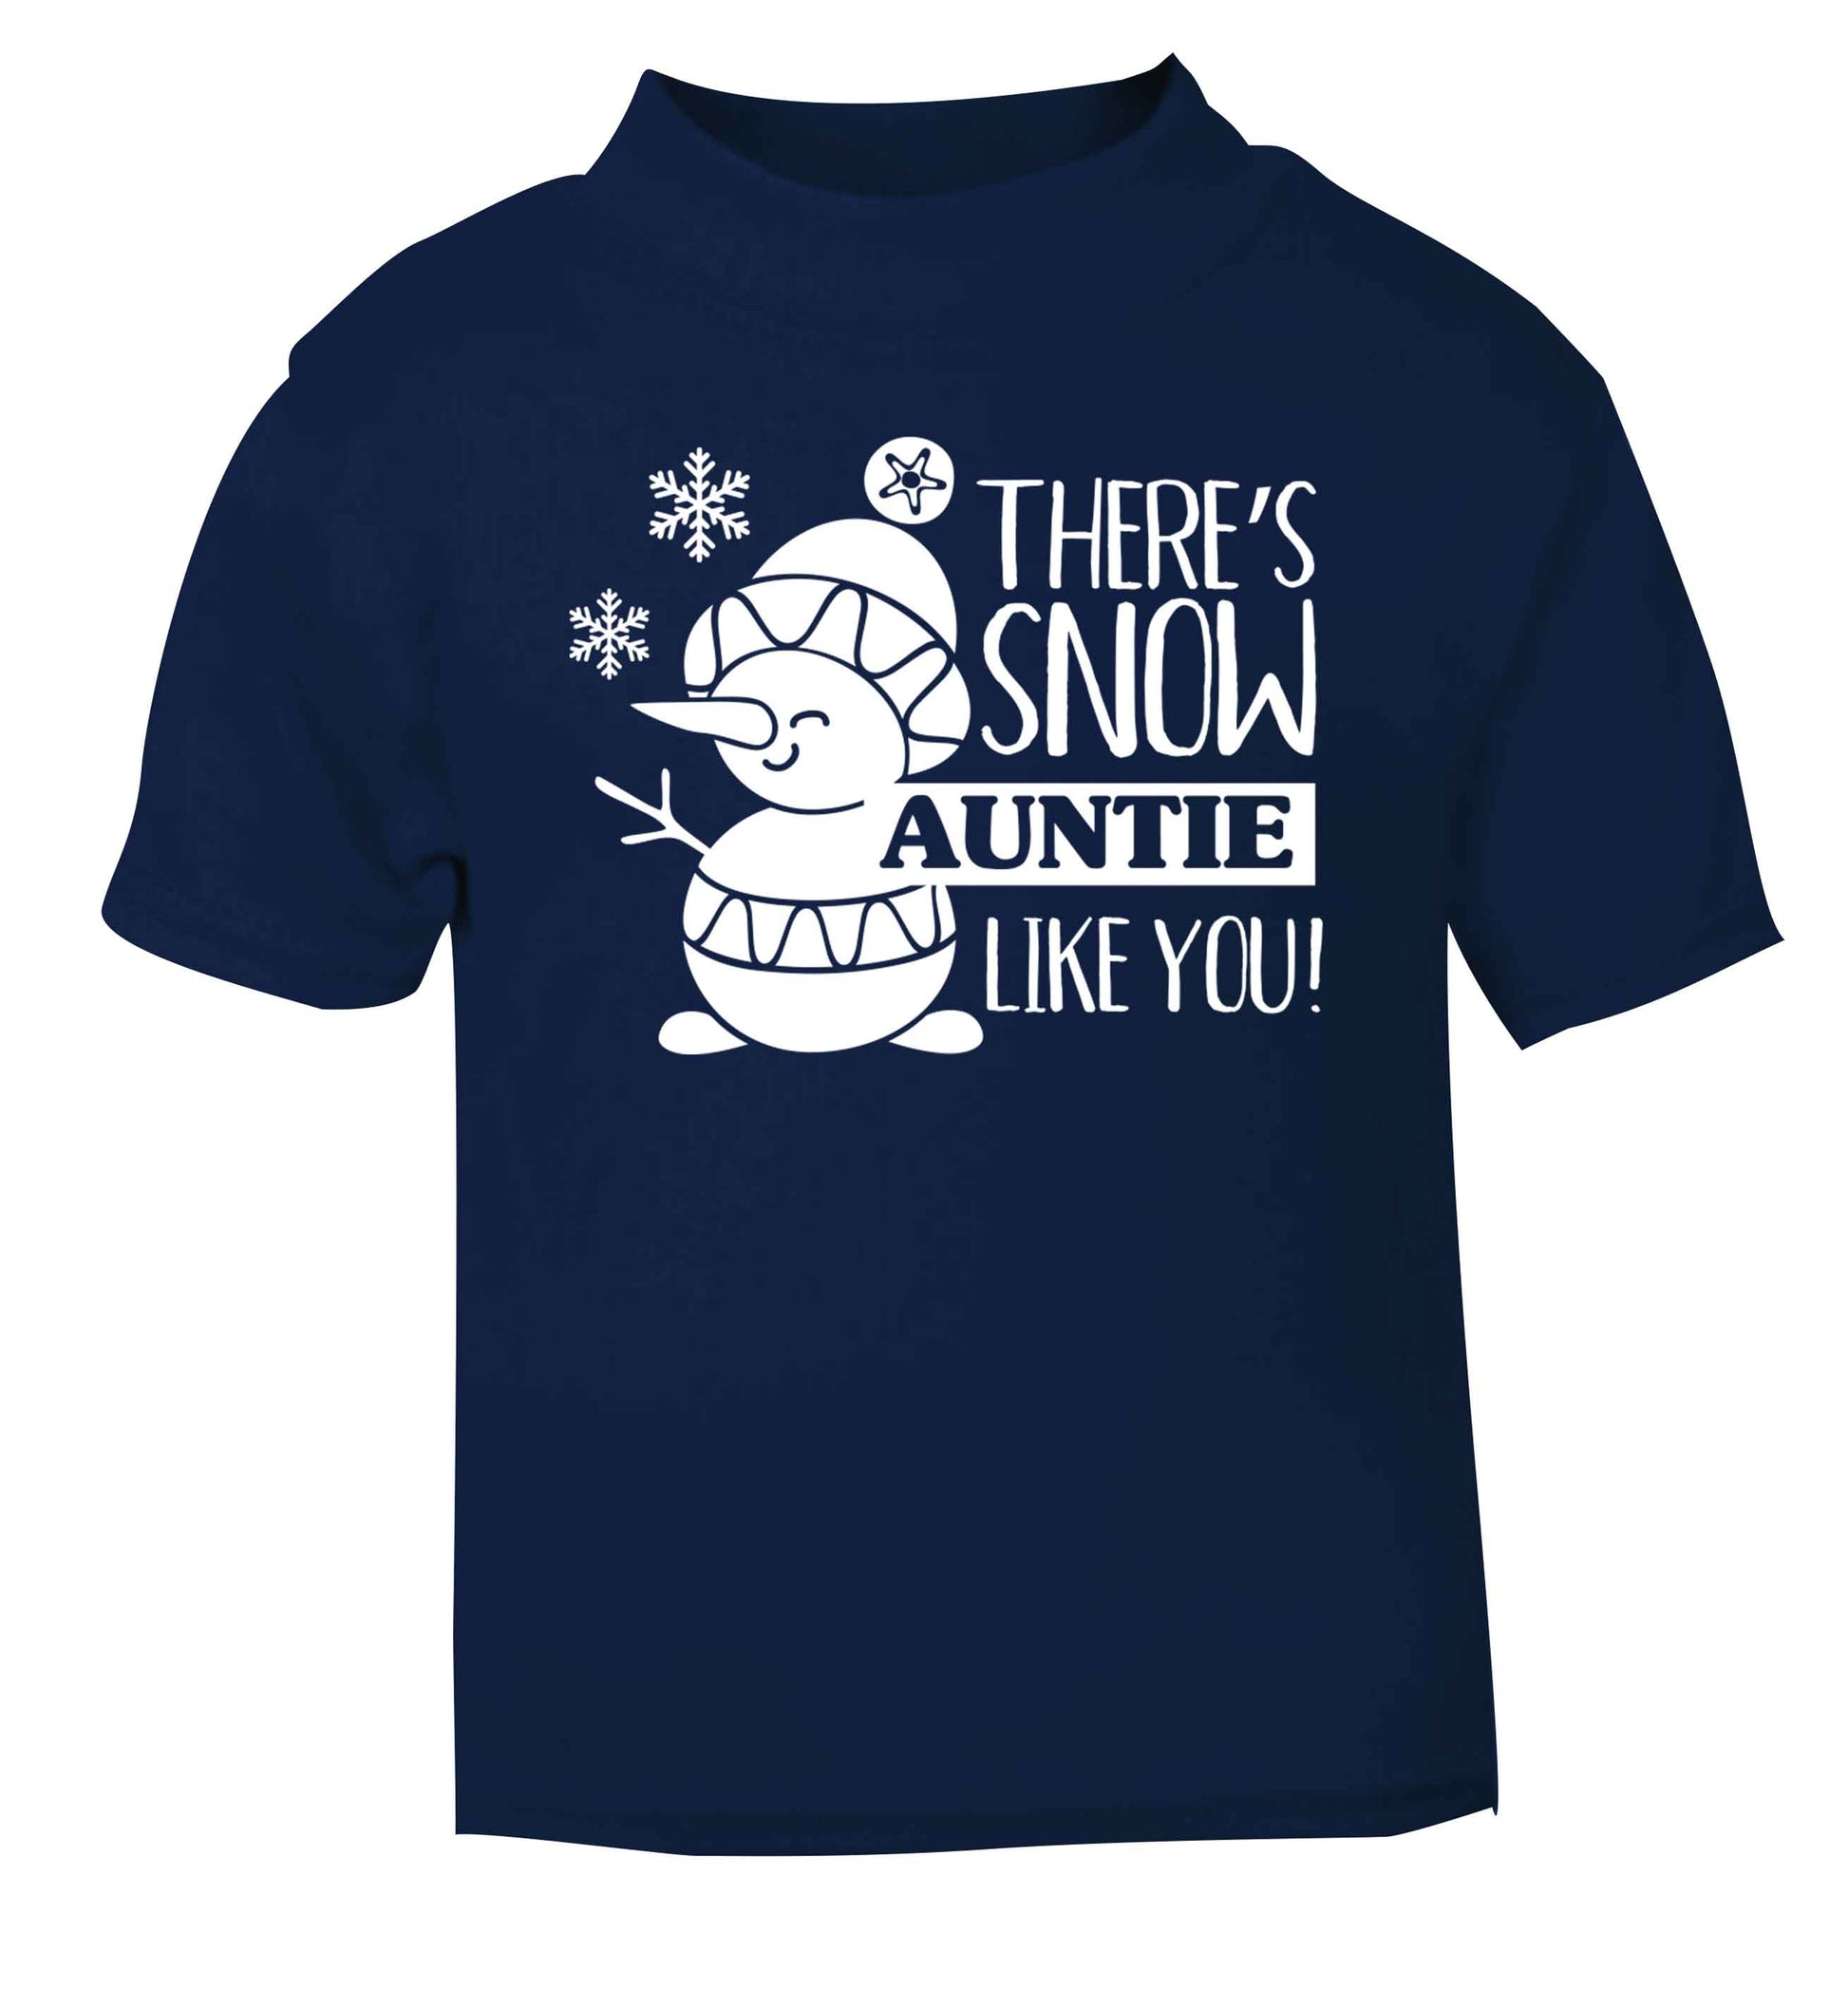 There's snow auntie like you navy baby toddler Tshirt 2 Years